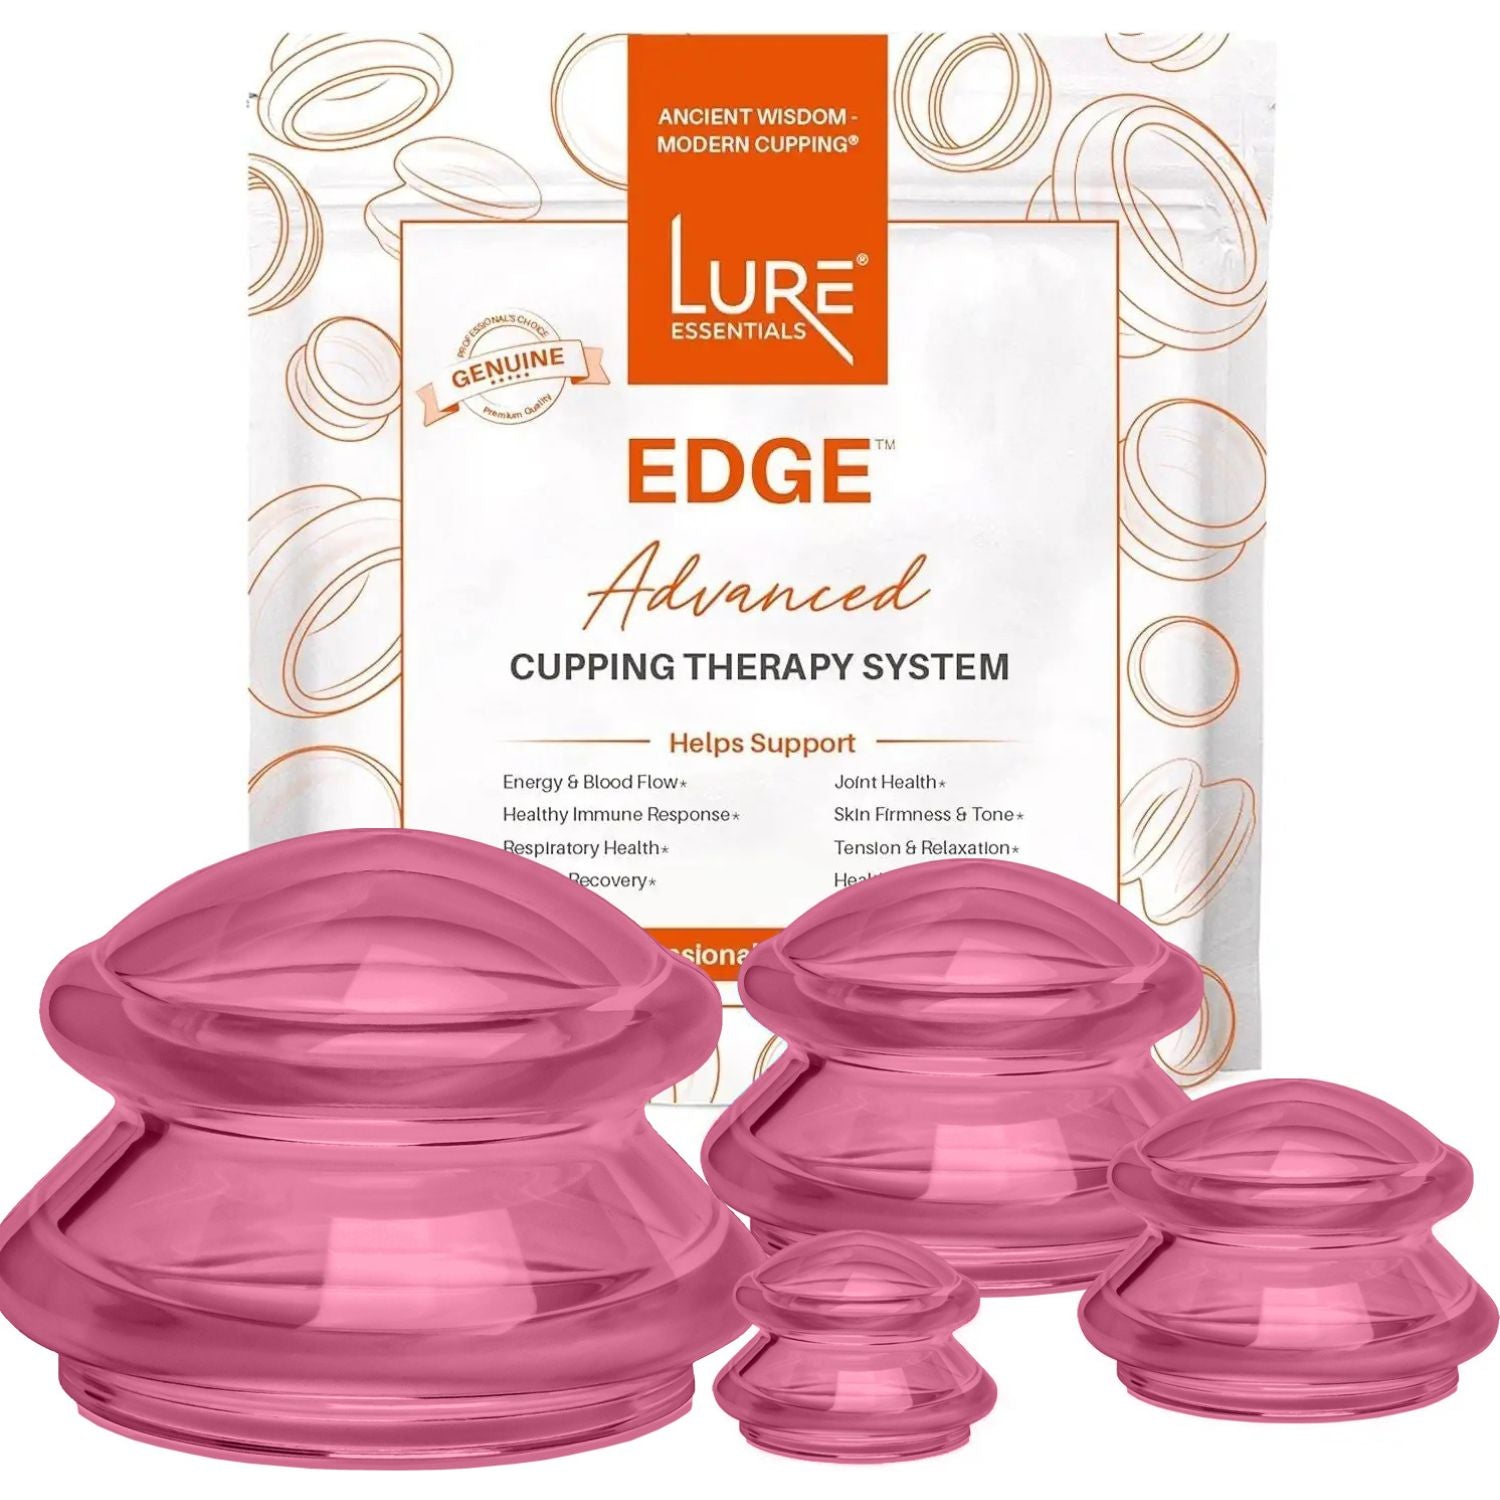  LURE Essentials Edge Cupping Therapy Set - Cupping Kit for  Massage Therapy - Silicone Cupping Set - Massage Cups for Cupping Therapy,  (Transparent 8 Cups - 2L, 2M, 4S, e-Book) 